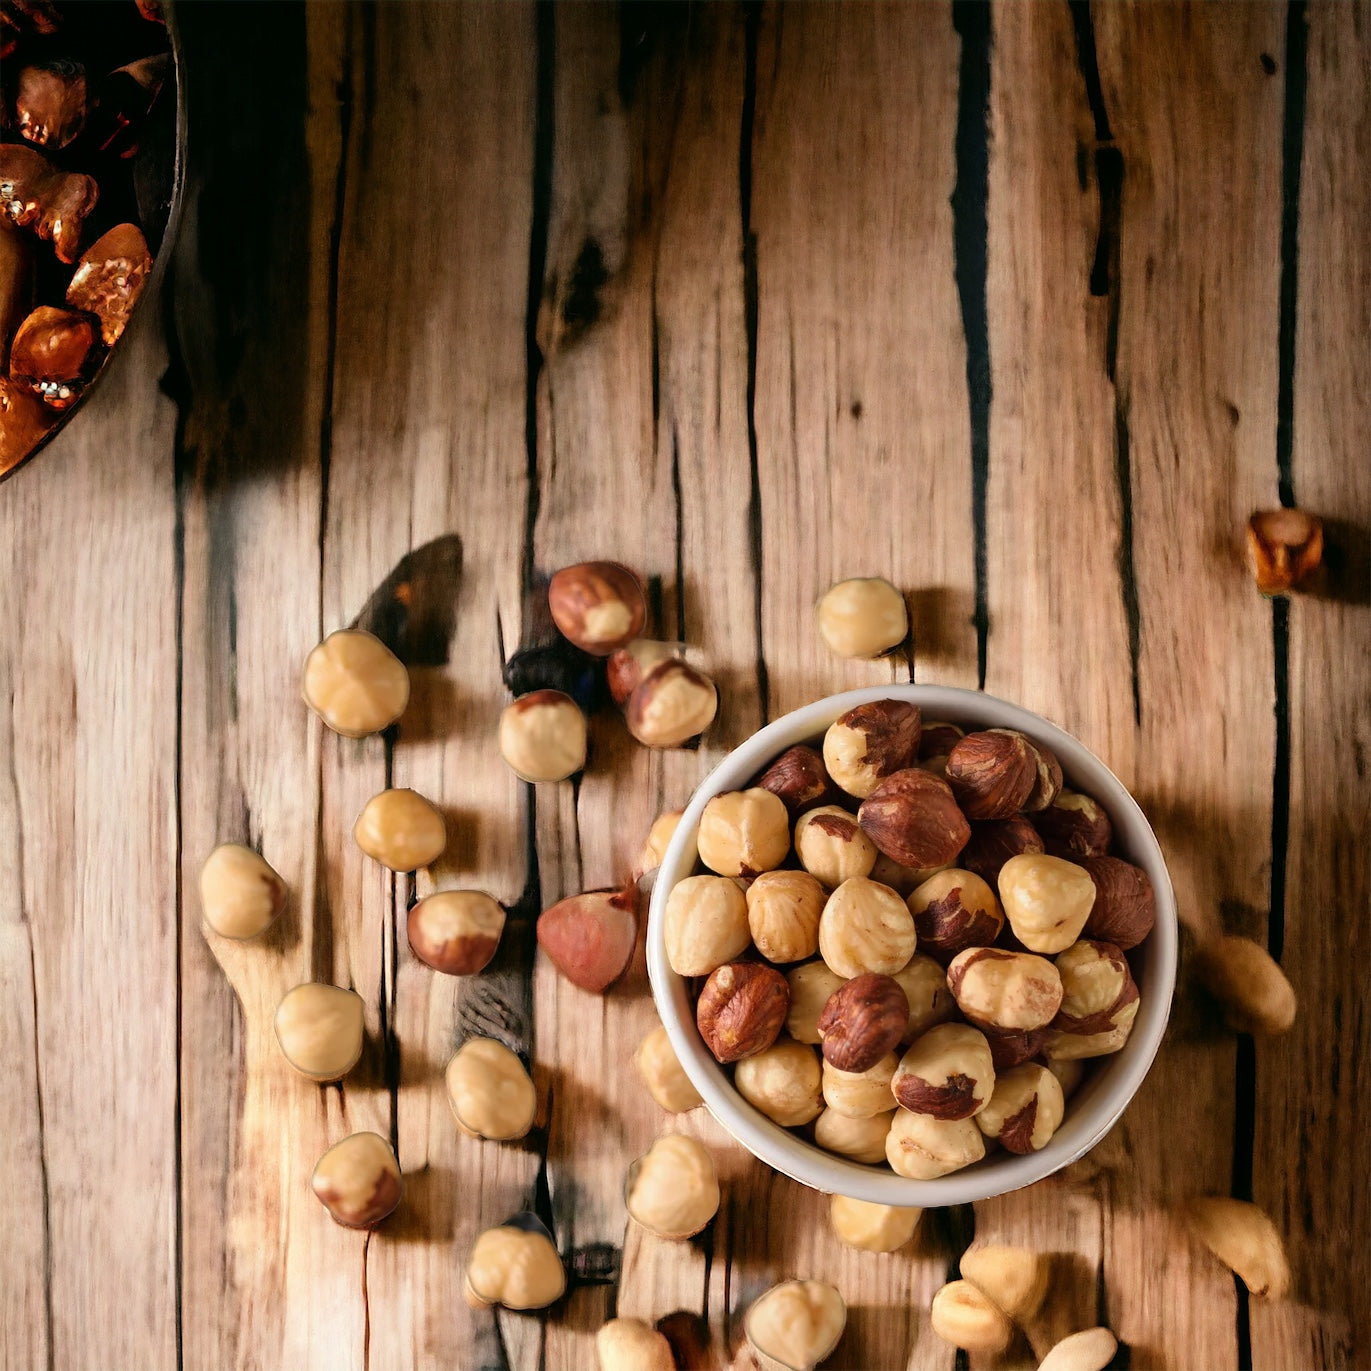 Bowl filled with shelled hazelnuts on a rustic wooden table